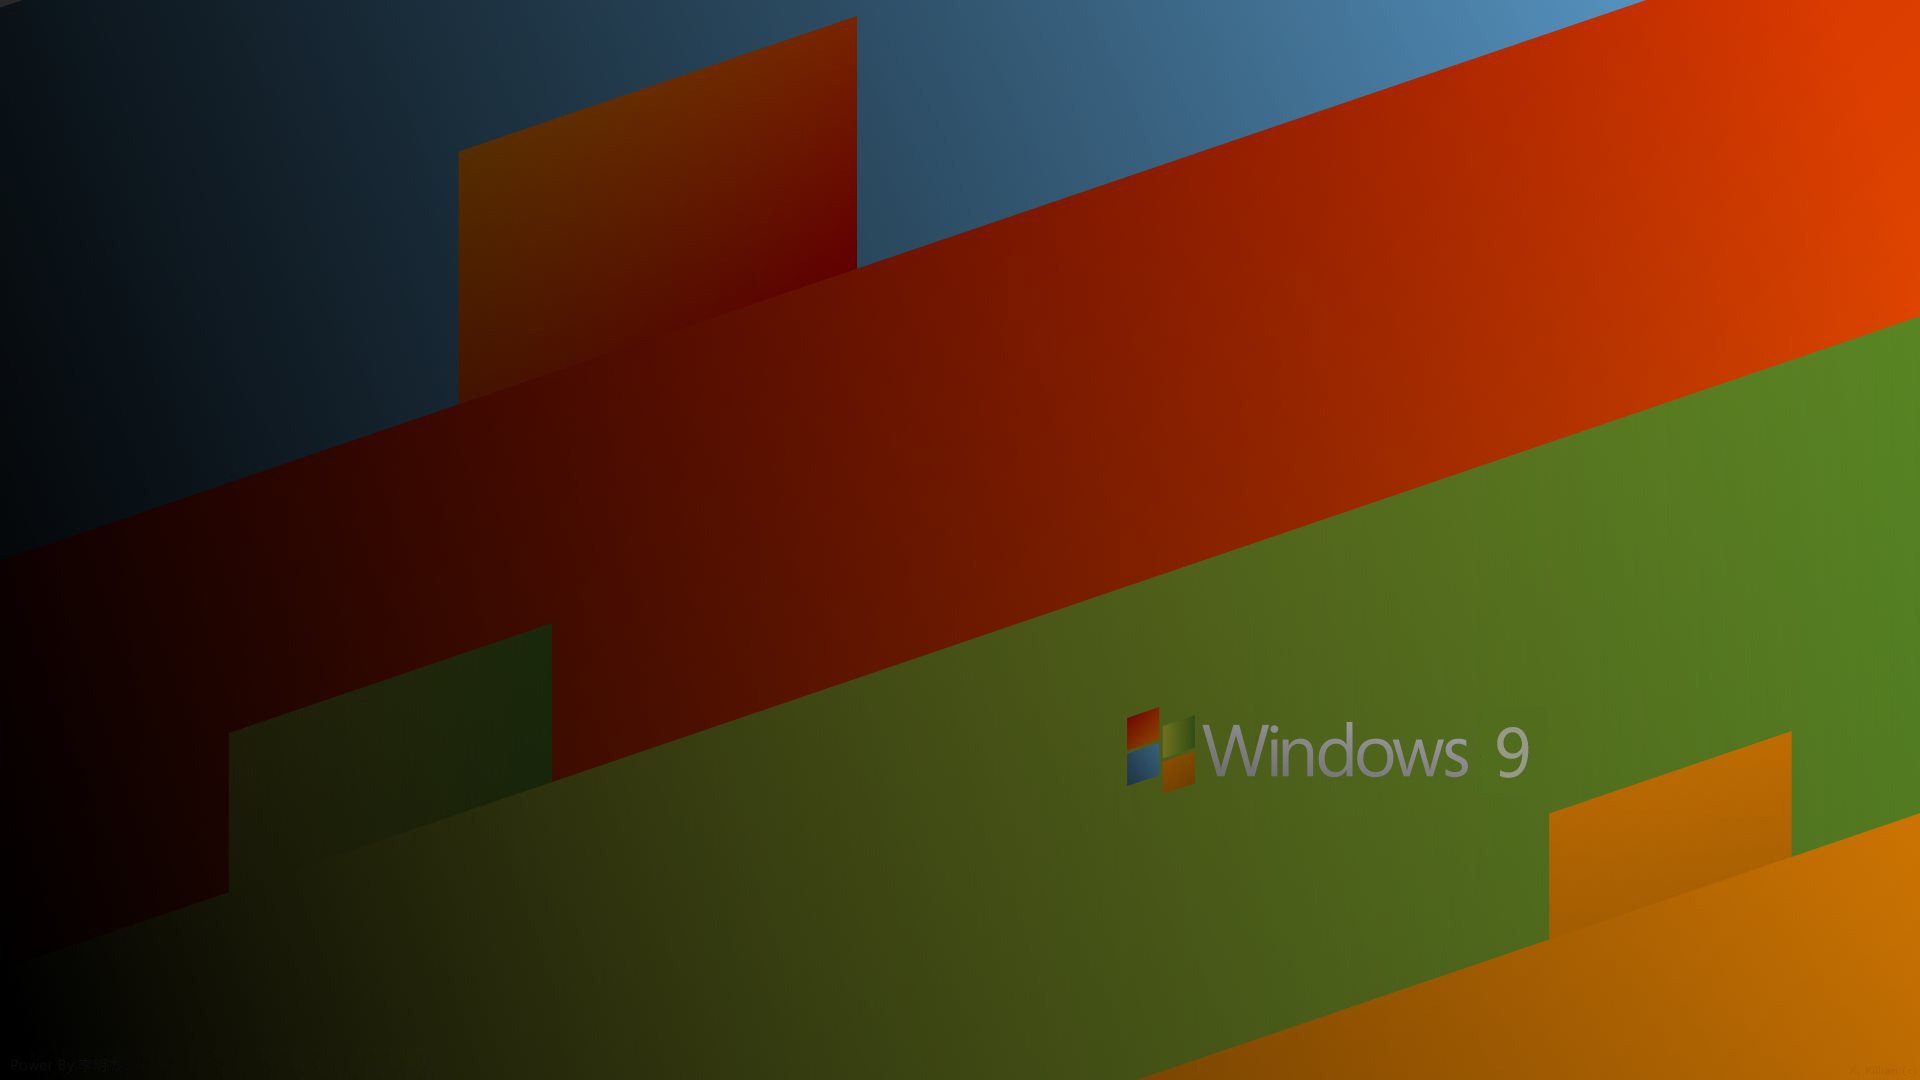 9 Windows 9 HD Wallpapers Backgrounds - Wallpaper Abyss